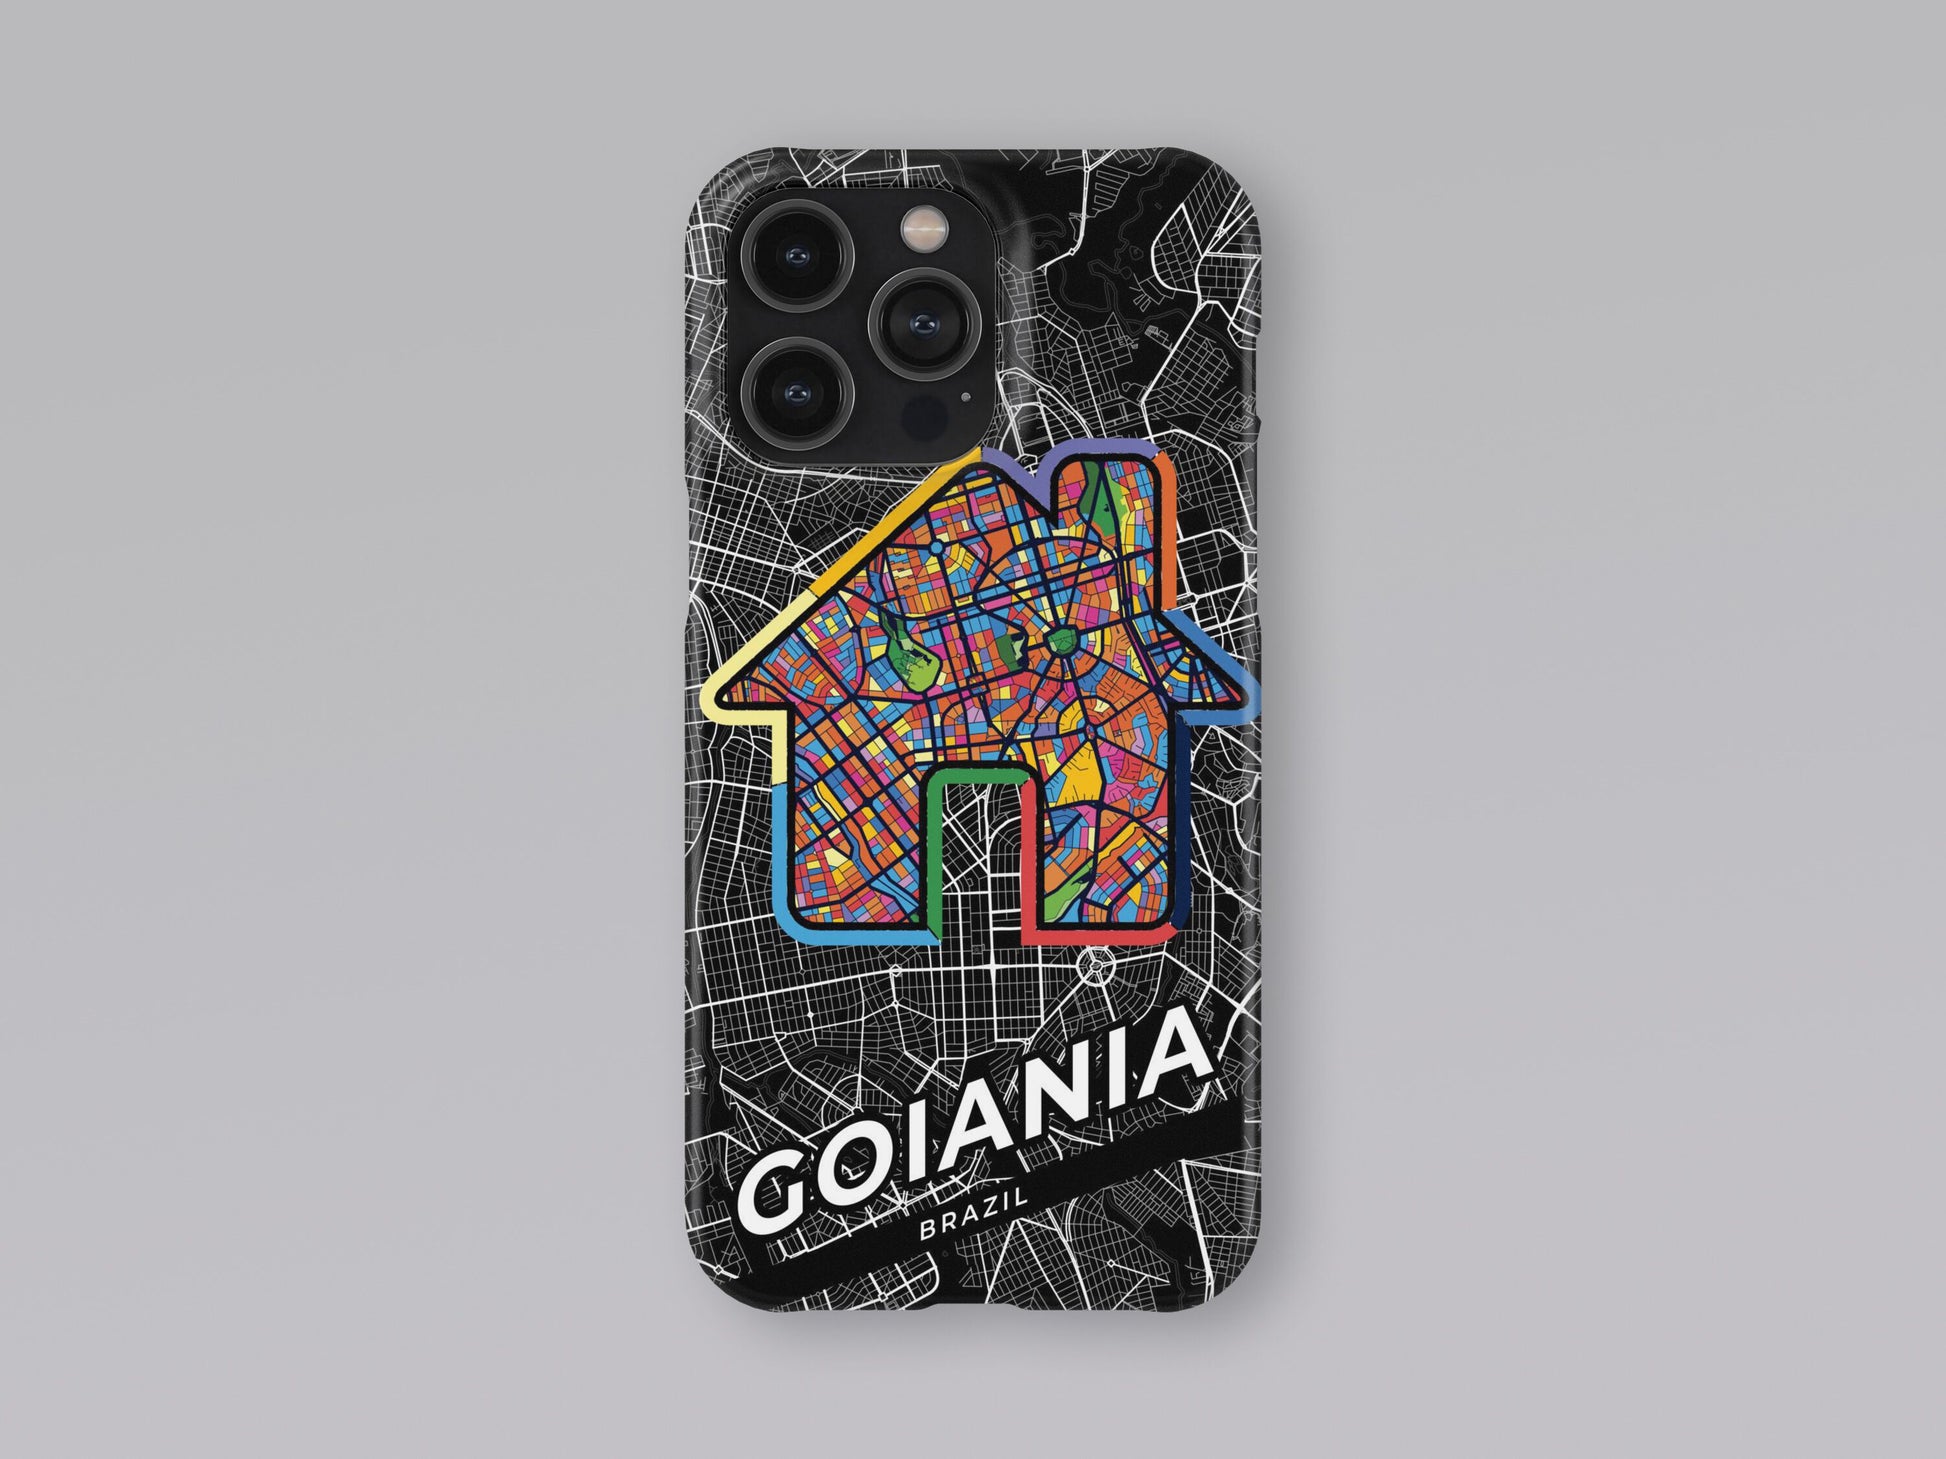 Goiania Brazil slim phone case with colorful icon. Birthday, wedding or housewarming gift. Couple match cases. 3